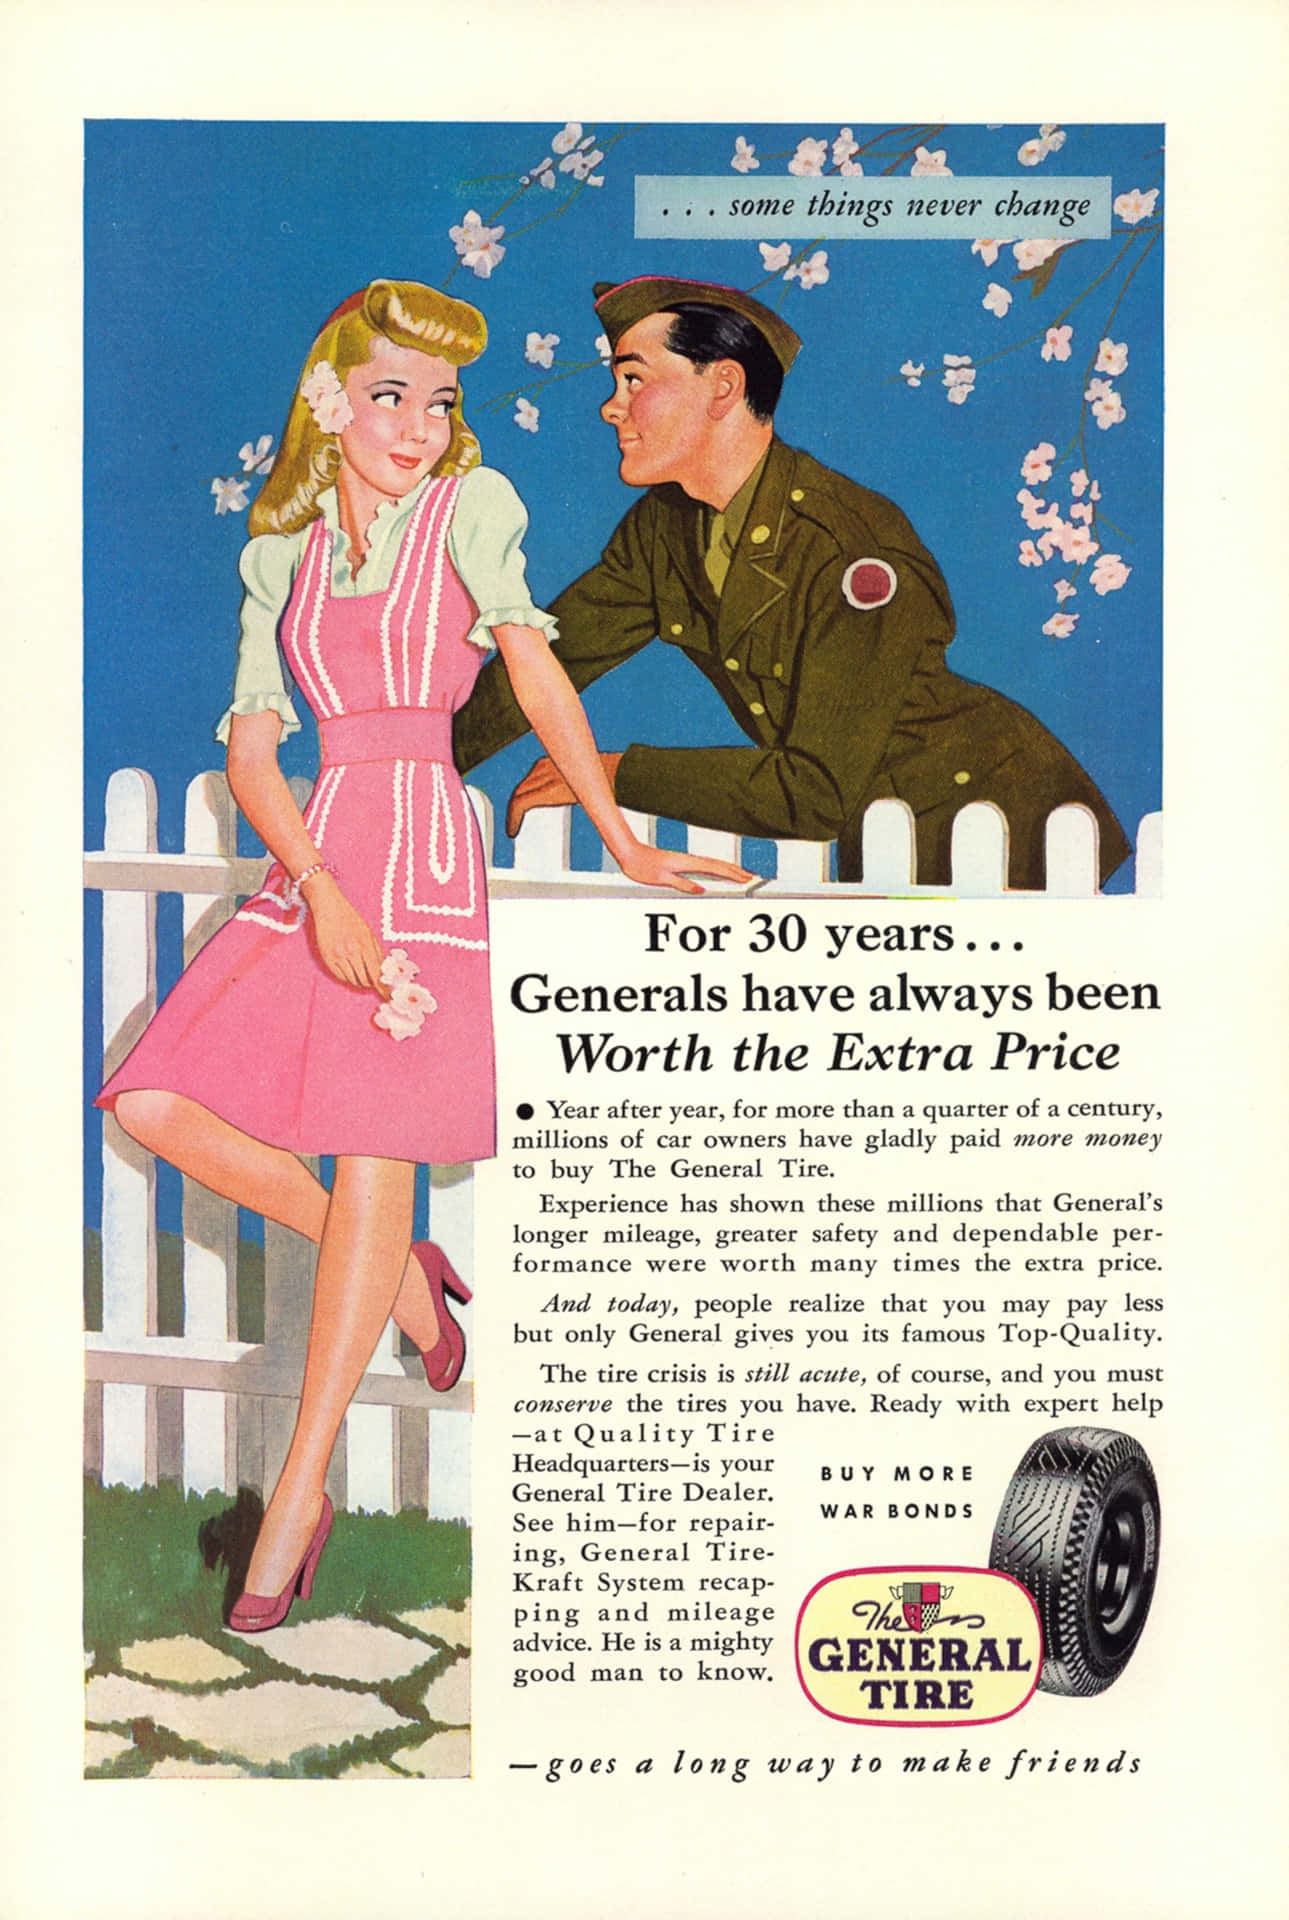 Retro Military Man Flirting With Woman General Tire Ad Wallpaper